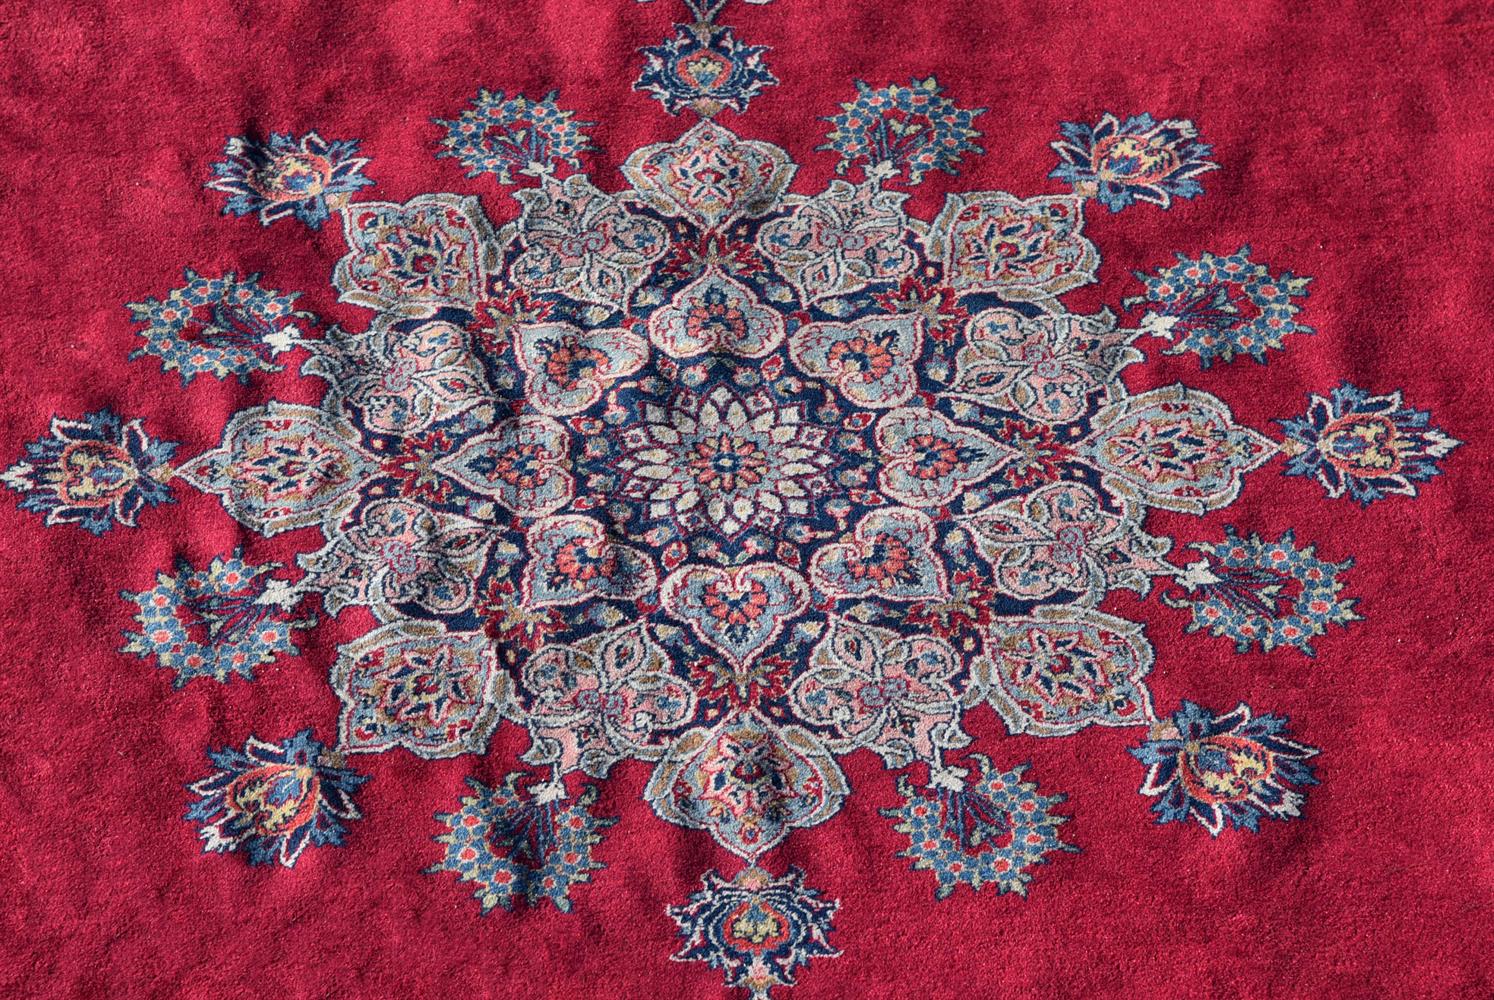 A PERSIAN CARPET, PROBABLY QUM, approximately 362 x 274cm - Image 2 of 3